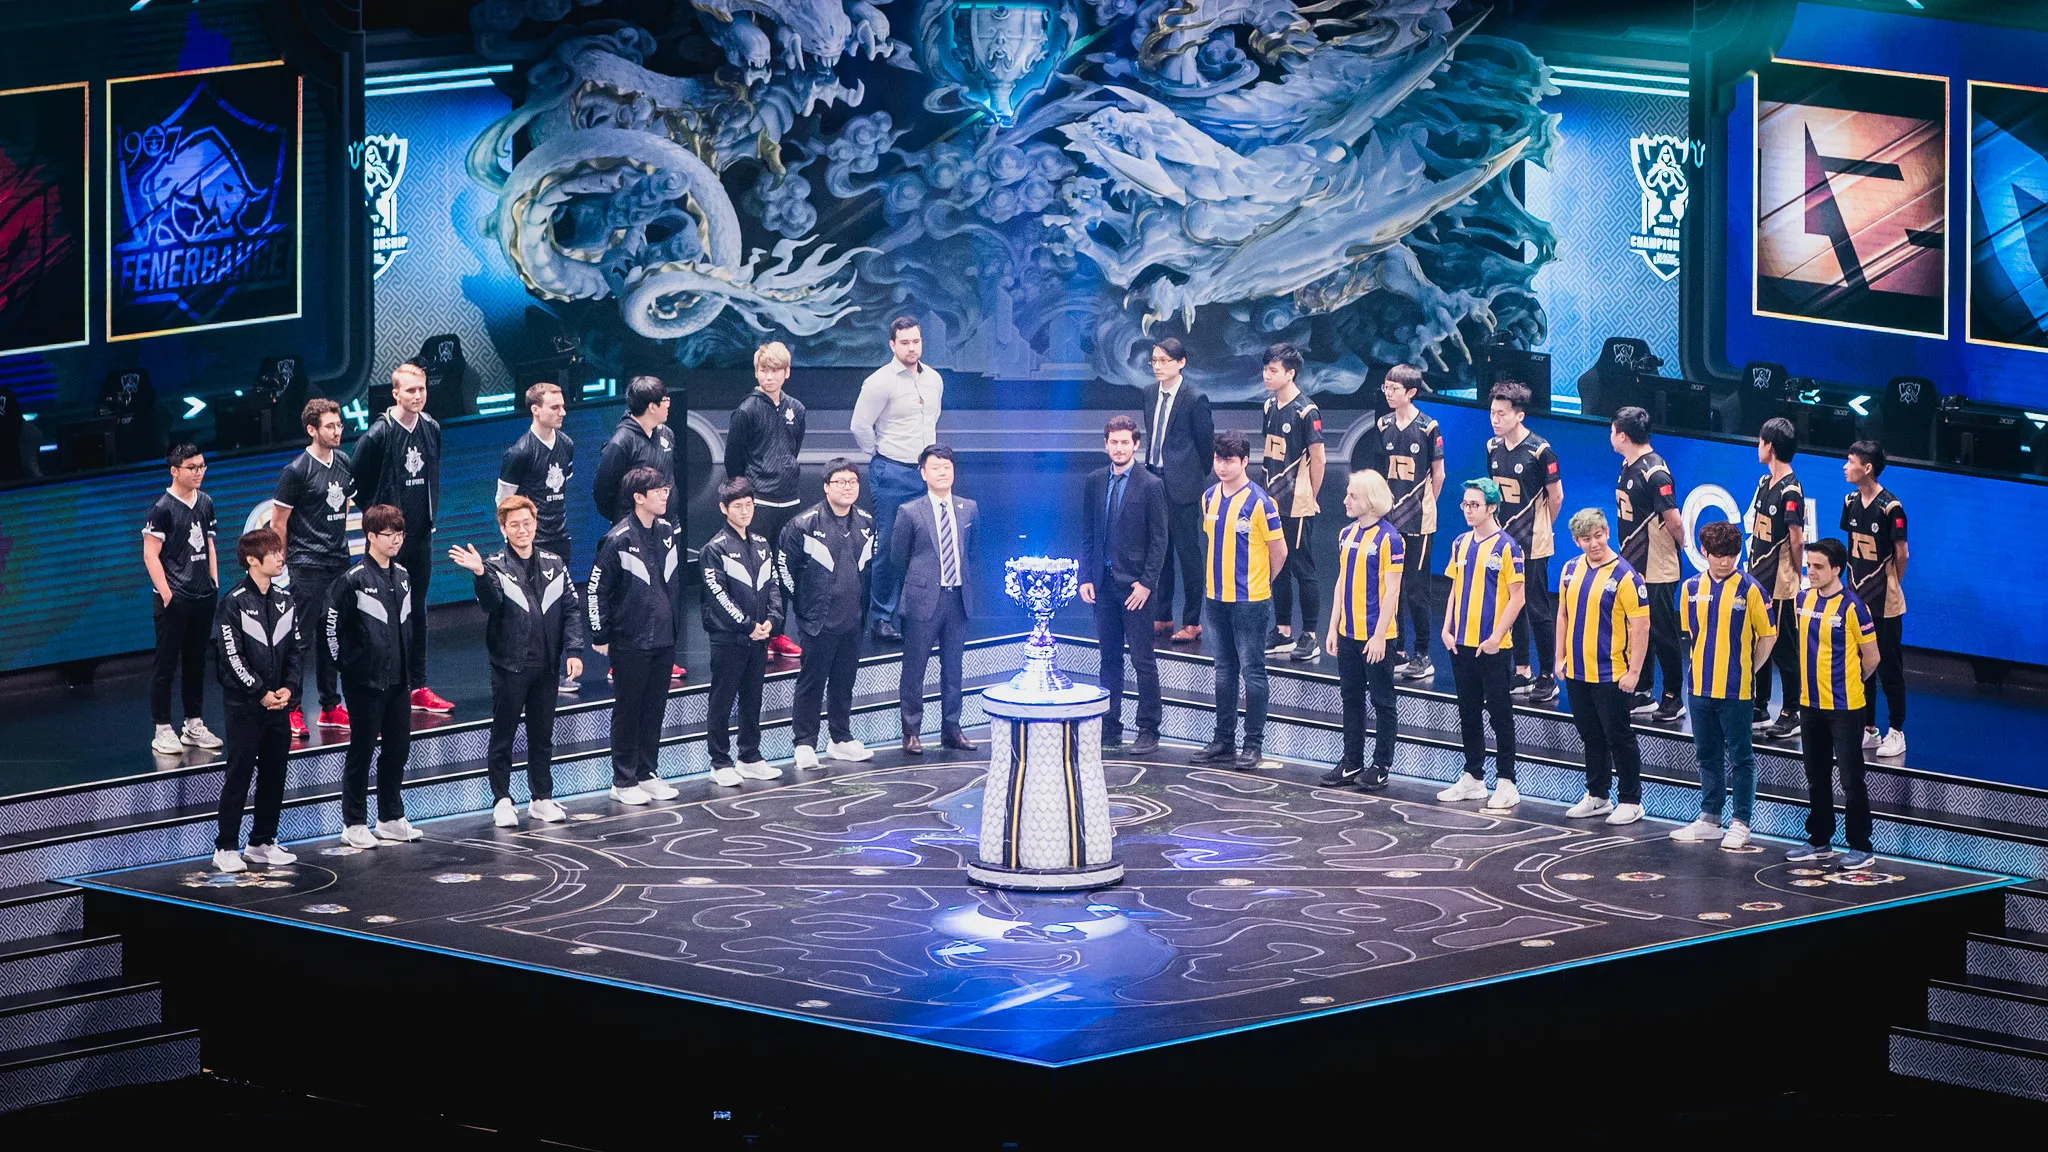 League of Legends: The Champions dominating Worlds 2017